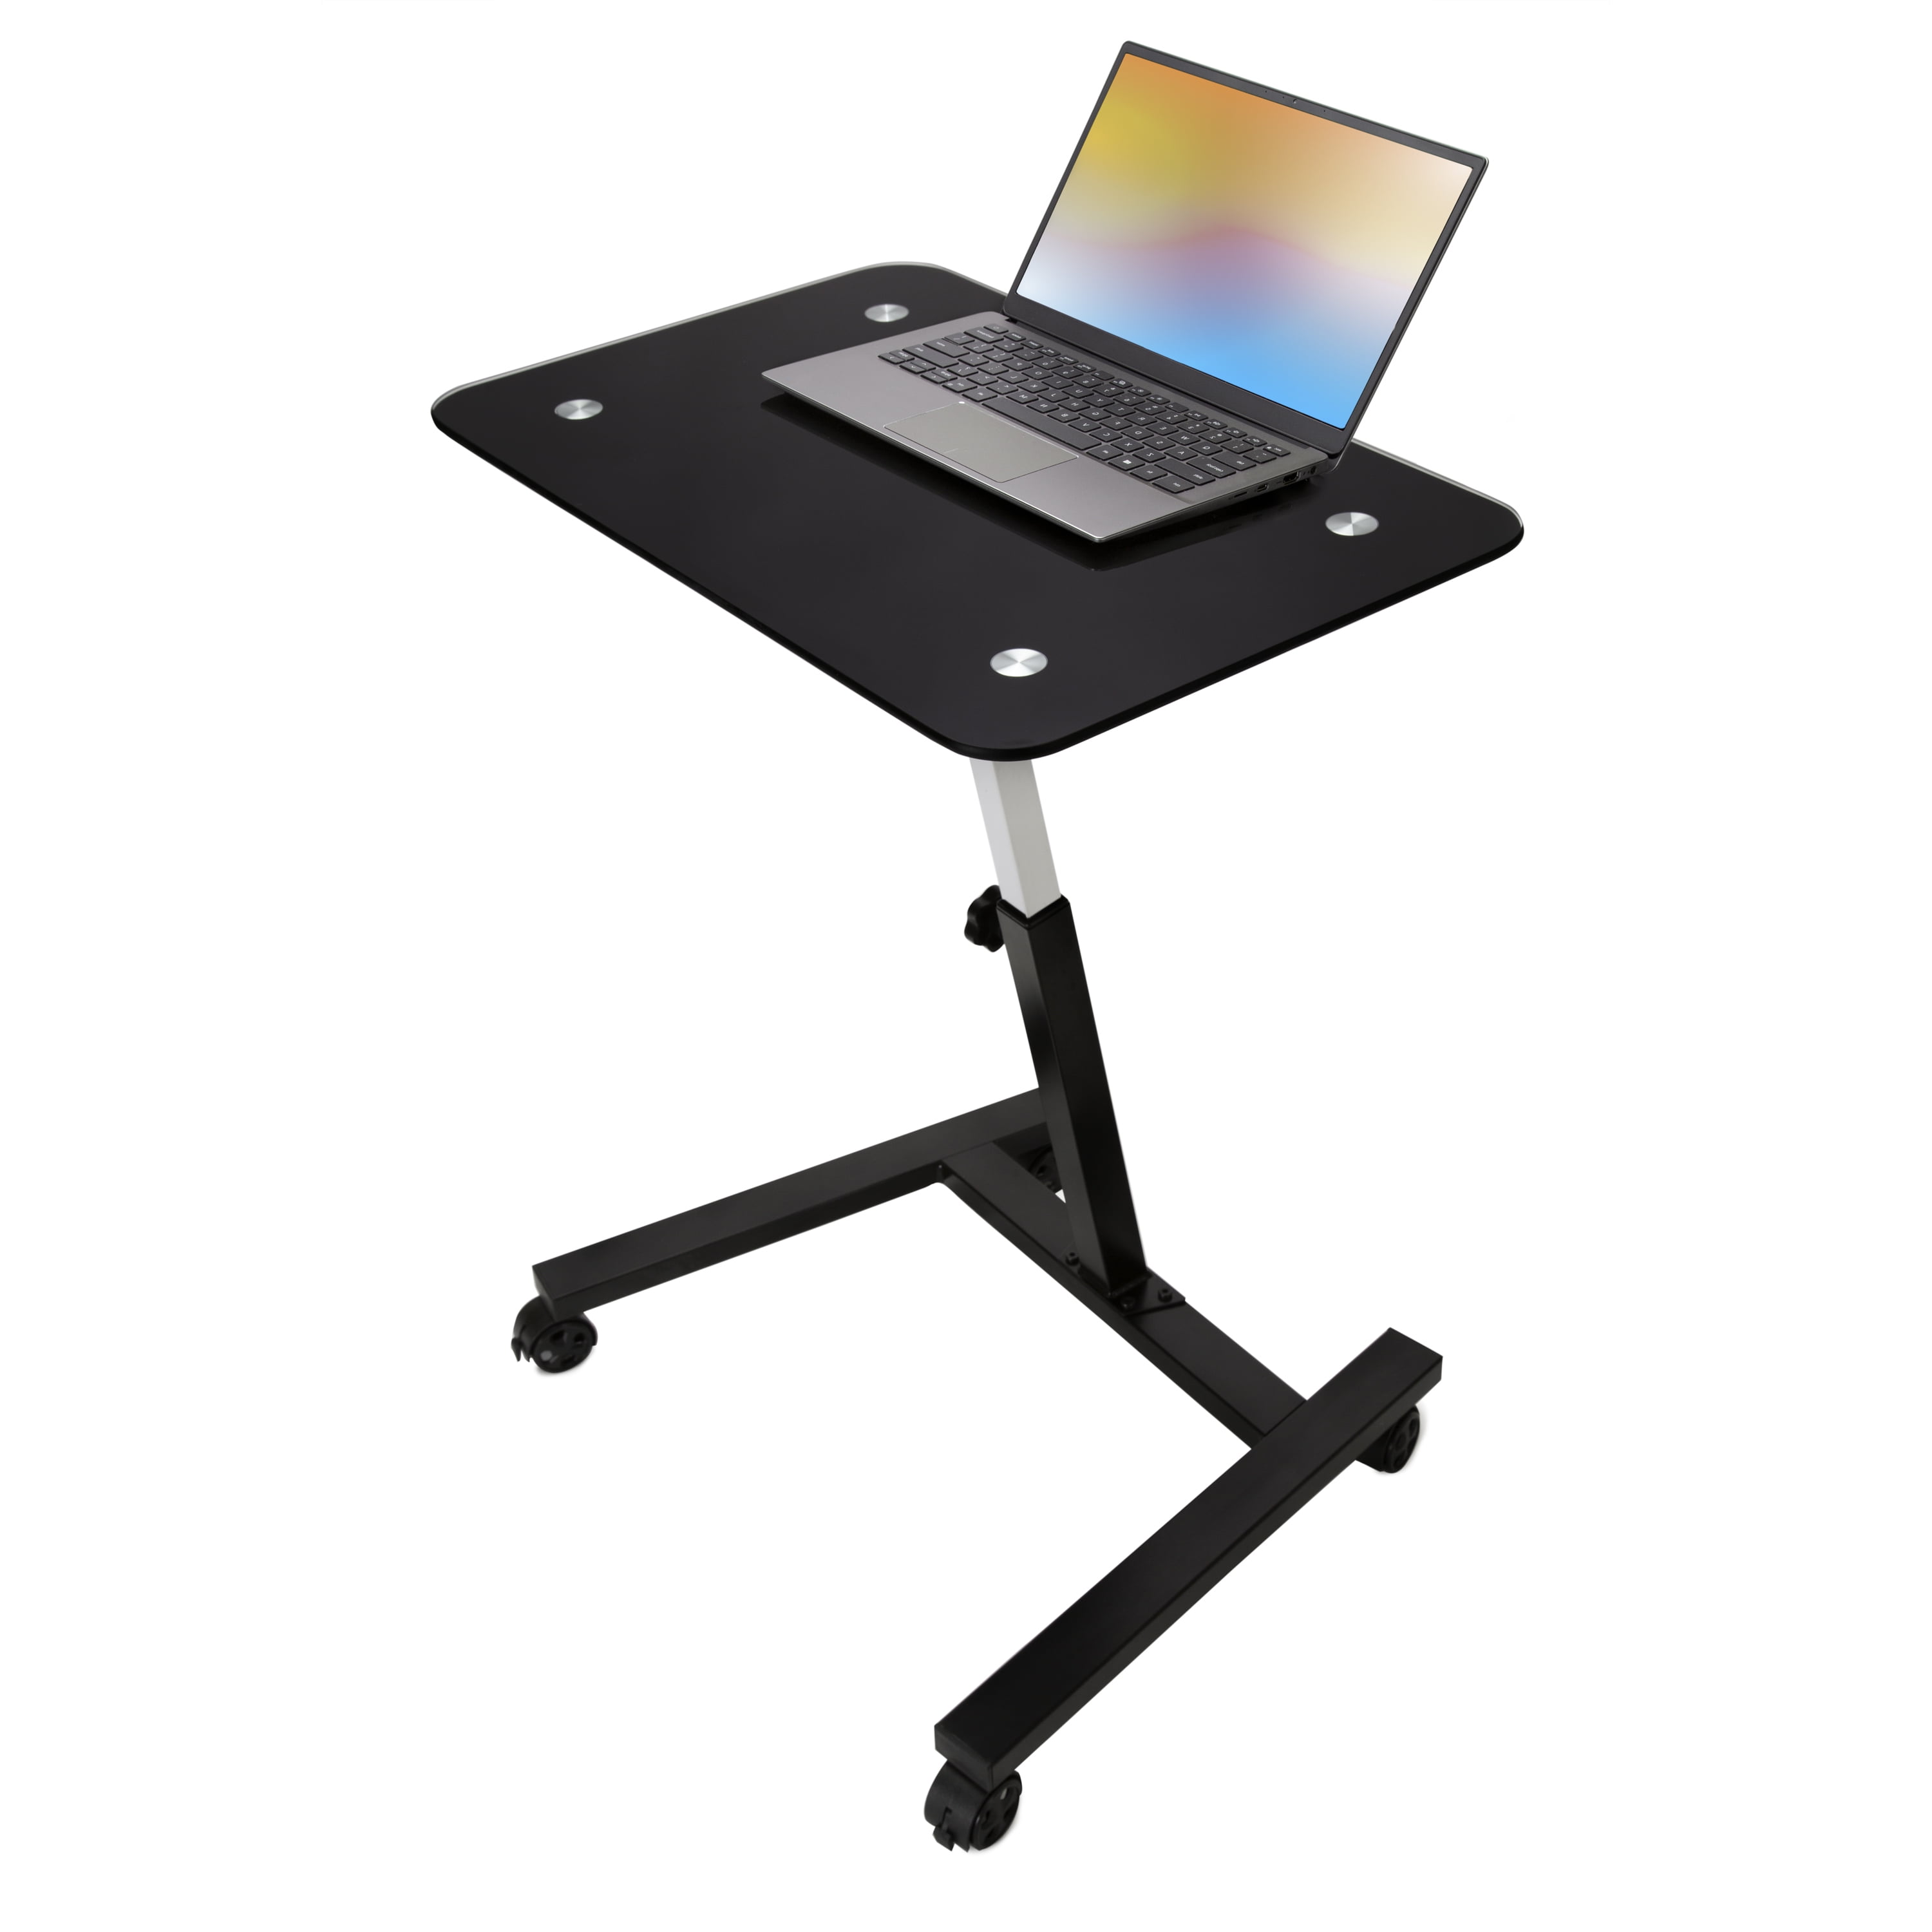 GFHFHITJ Sit-Stand Portable Mobile Laptop Desk Notebook Tables Cart Side Table Moveable Bed Tray Book Stand Computer Desk with Adjustable Top and Casters Black 